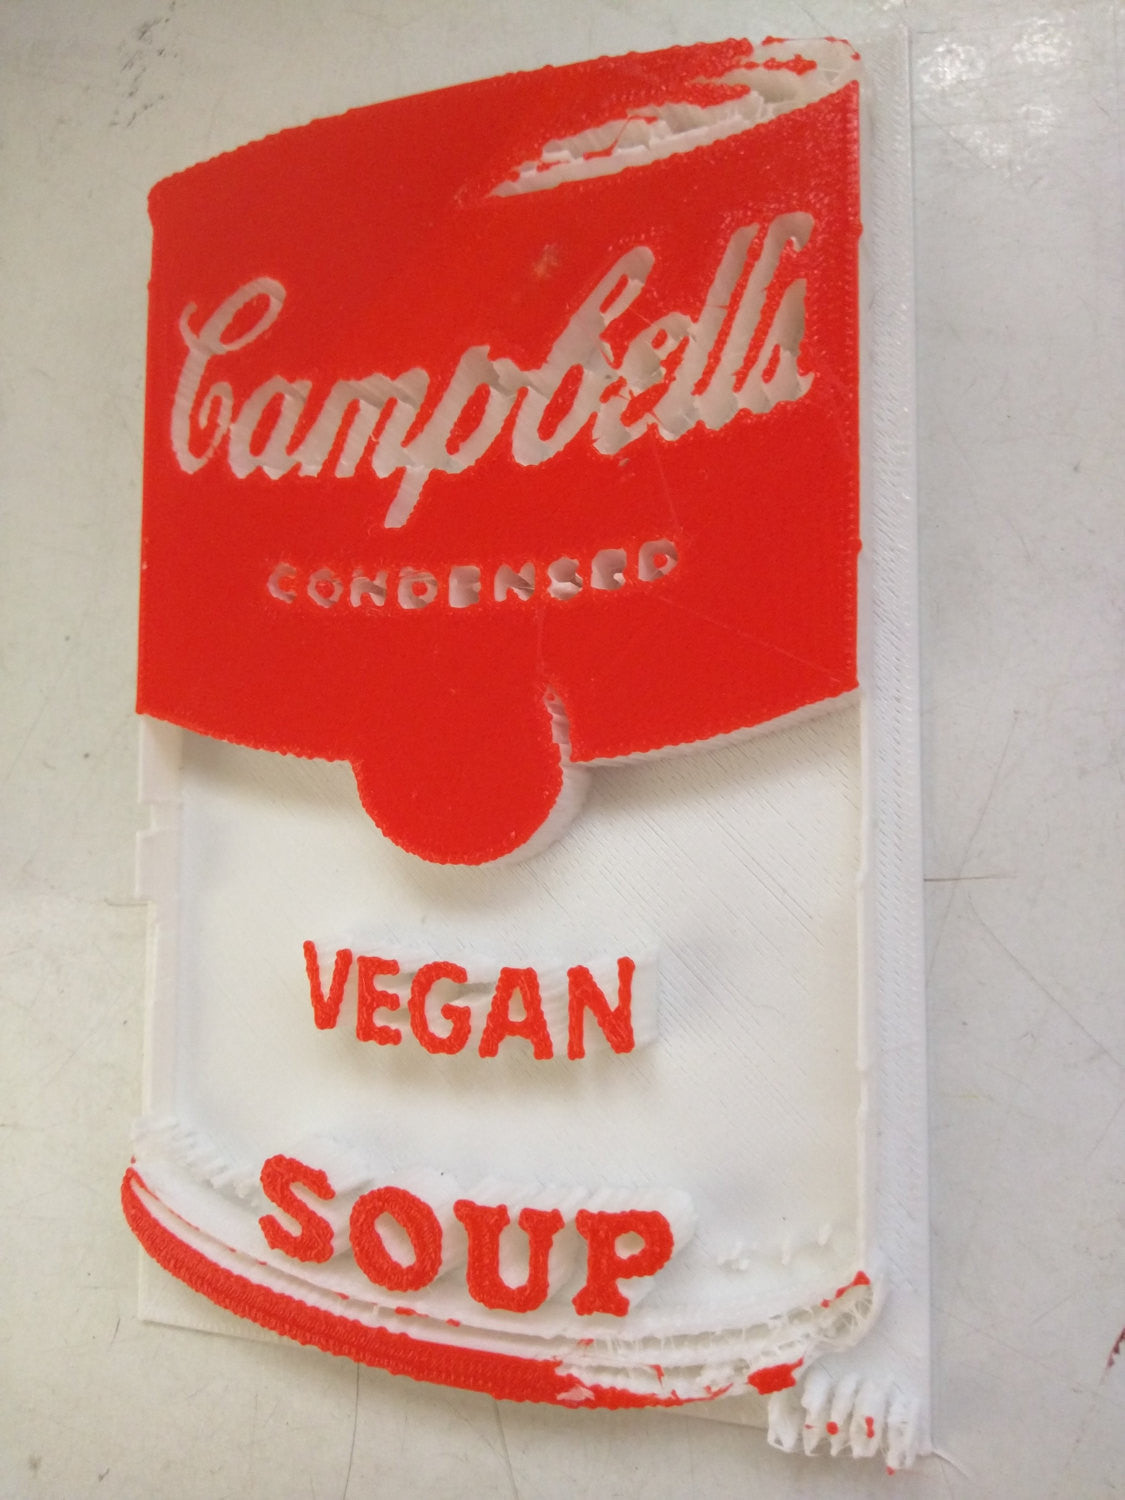 3D printed Campbell's Vegan Soup Red & White by L3f0u